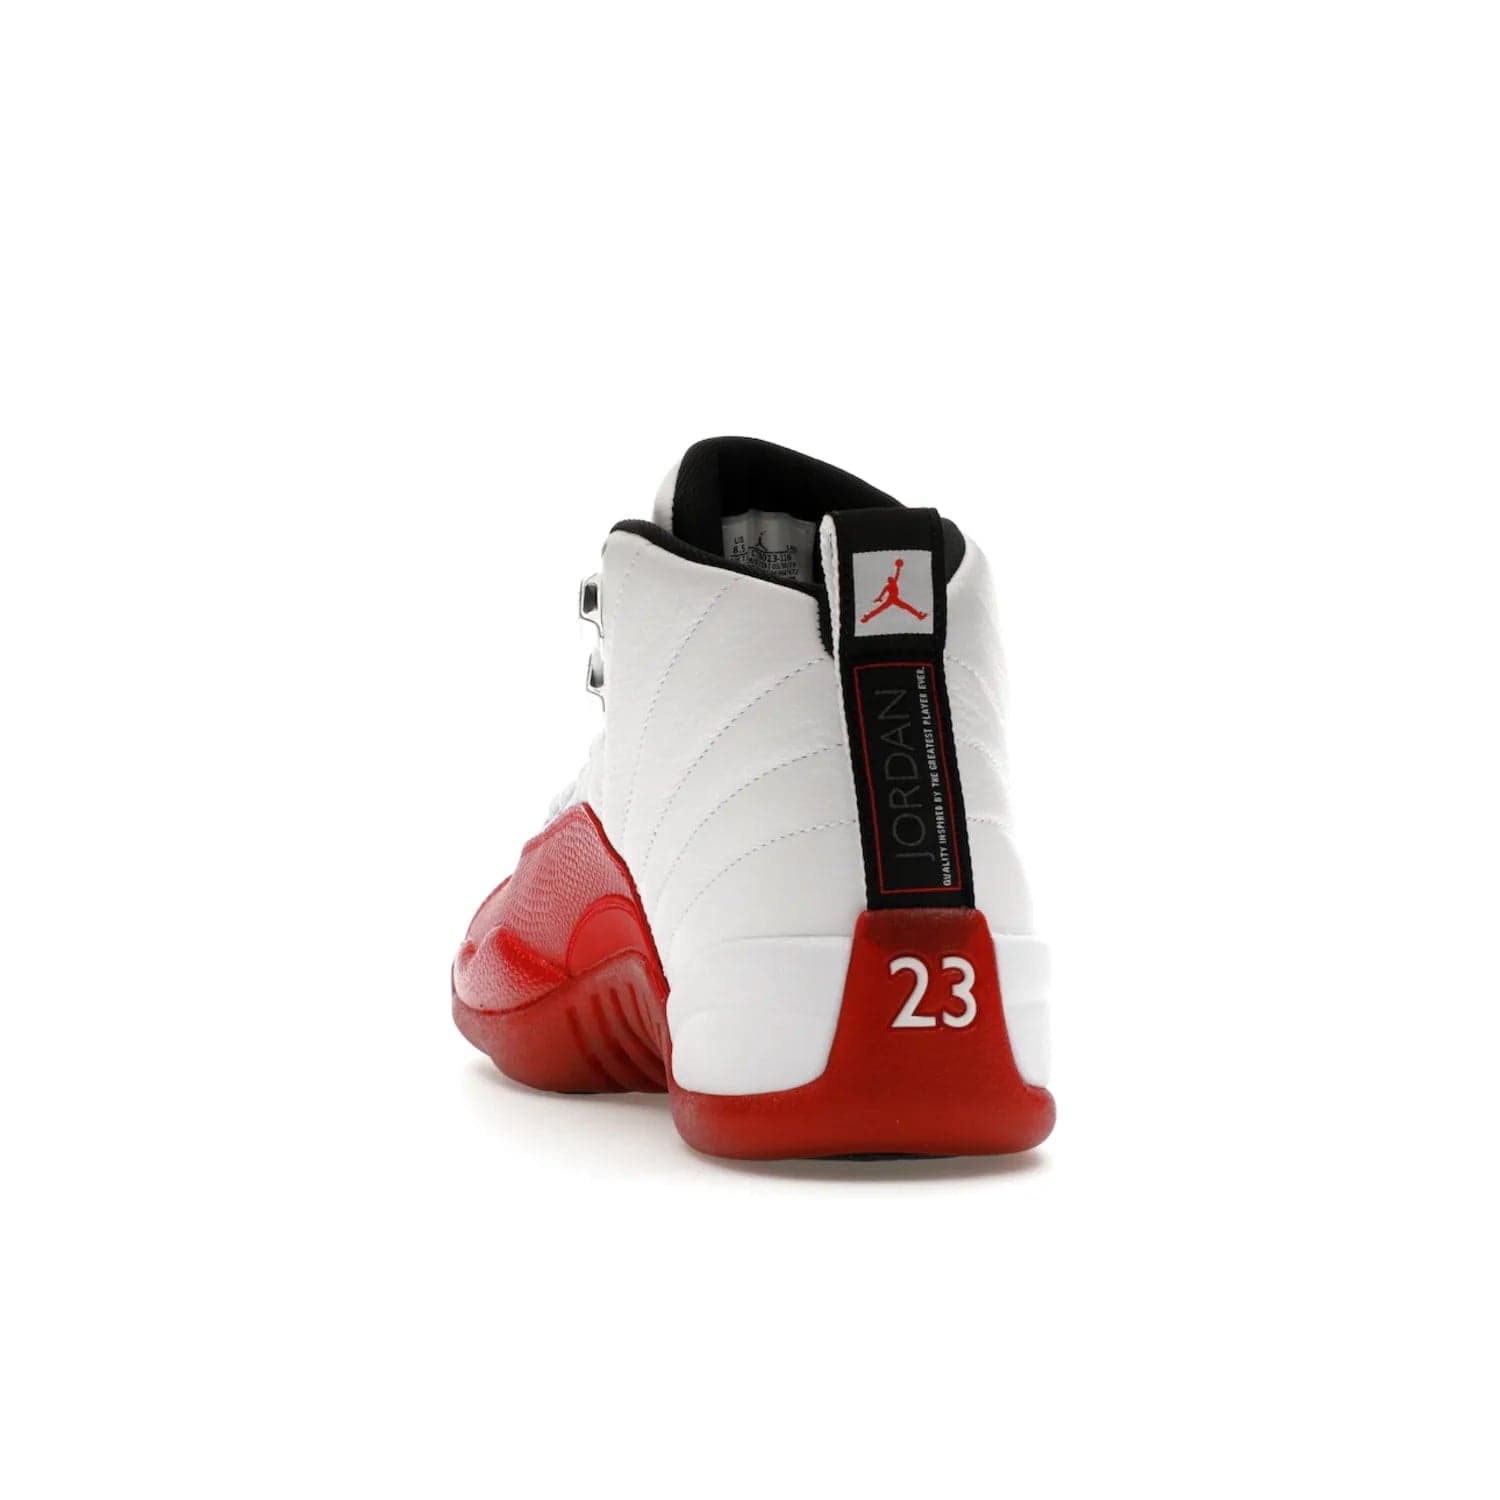 Jordan 12 Retro Cherry (2023) - Image 26 - Only at www.BallersClubKickz.com - Live your sneaker legend with the Jordan 12 Retro Cherry. Iconic pebbled leather mudguards, quilted uppers, and varsity red accents make this 1997 classic a must-have for 2023. Shine on with silver hardware and matching midsoles, and bring it all together for limited-edition style on October 28th. Step into Jordan legacy with the Retro Cherry.